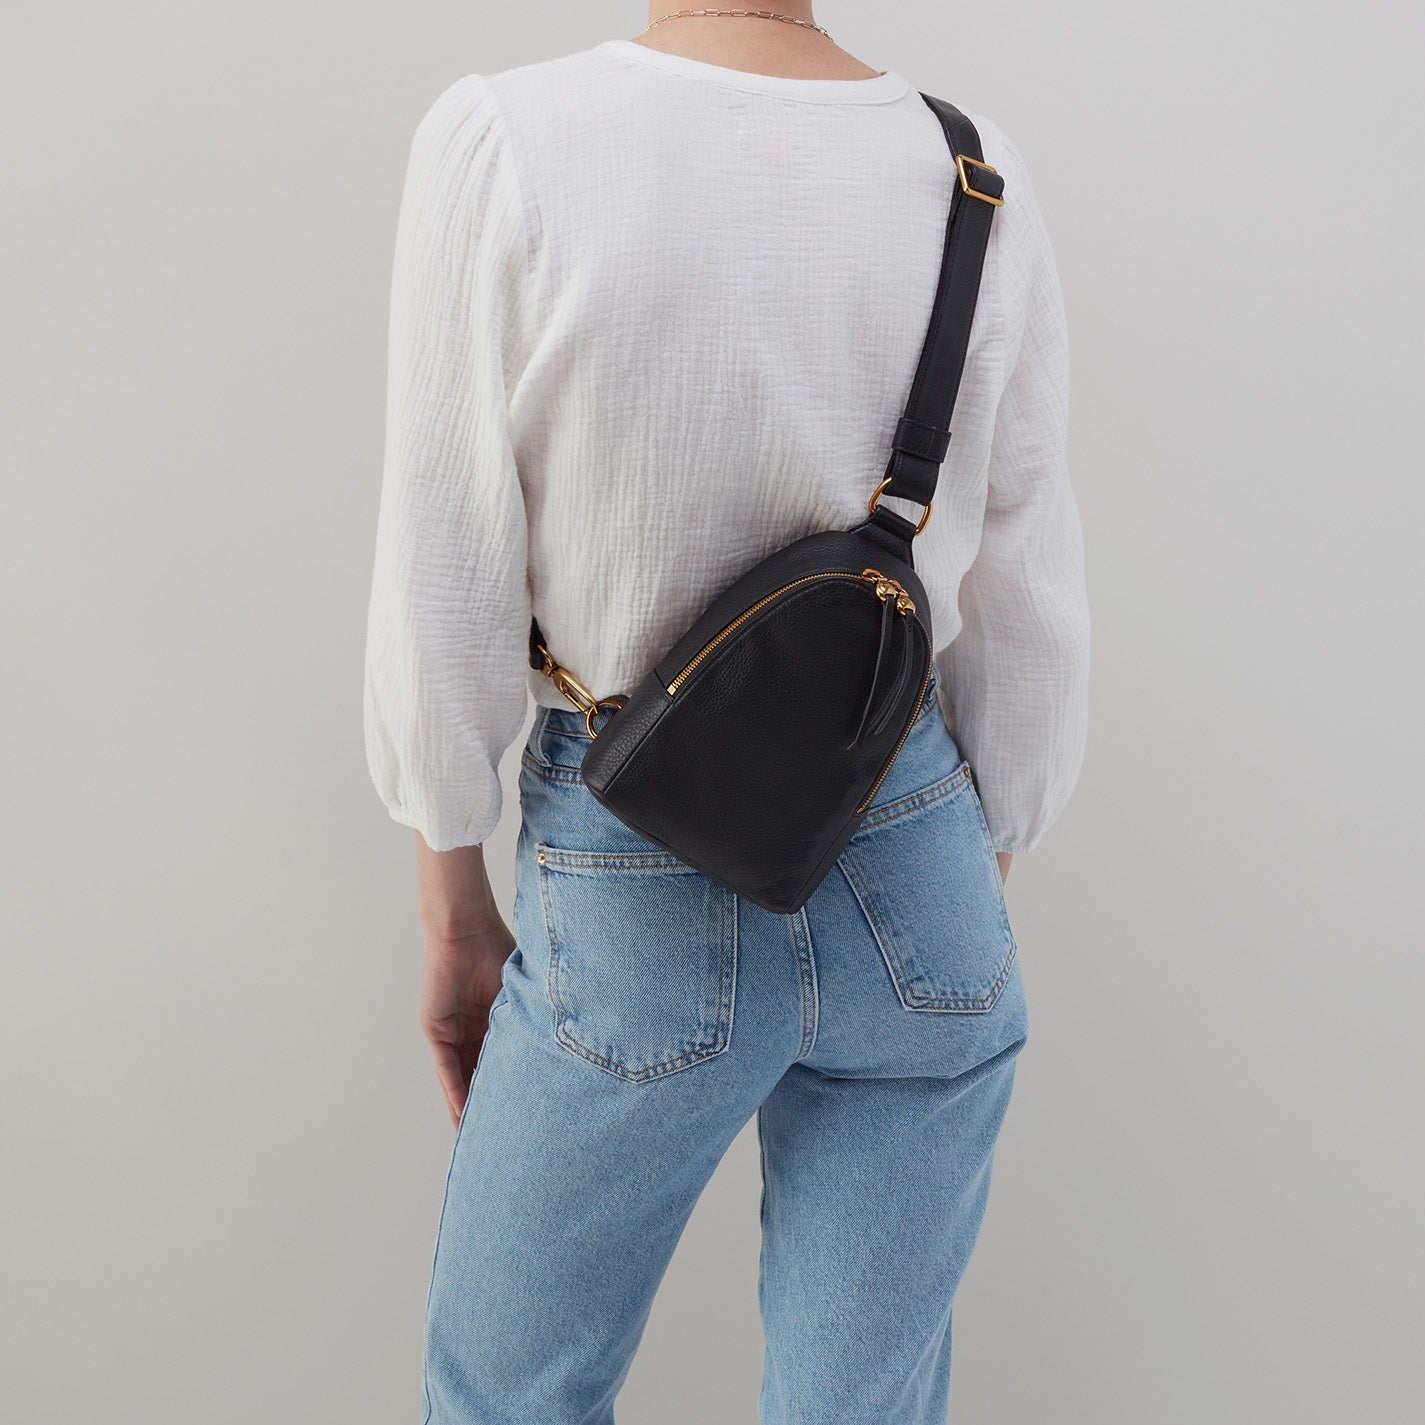 person wearing jeans and a white blouse with black fern sling on their back.